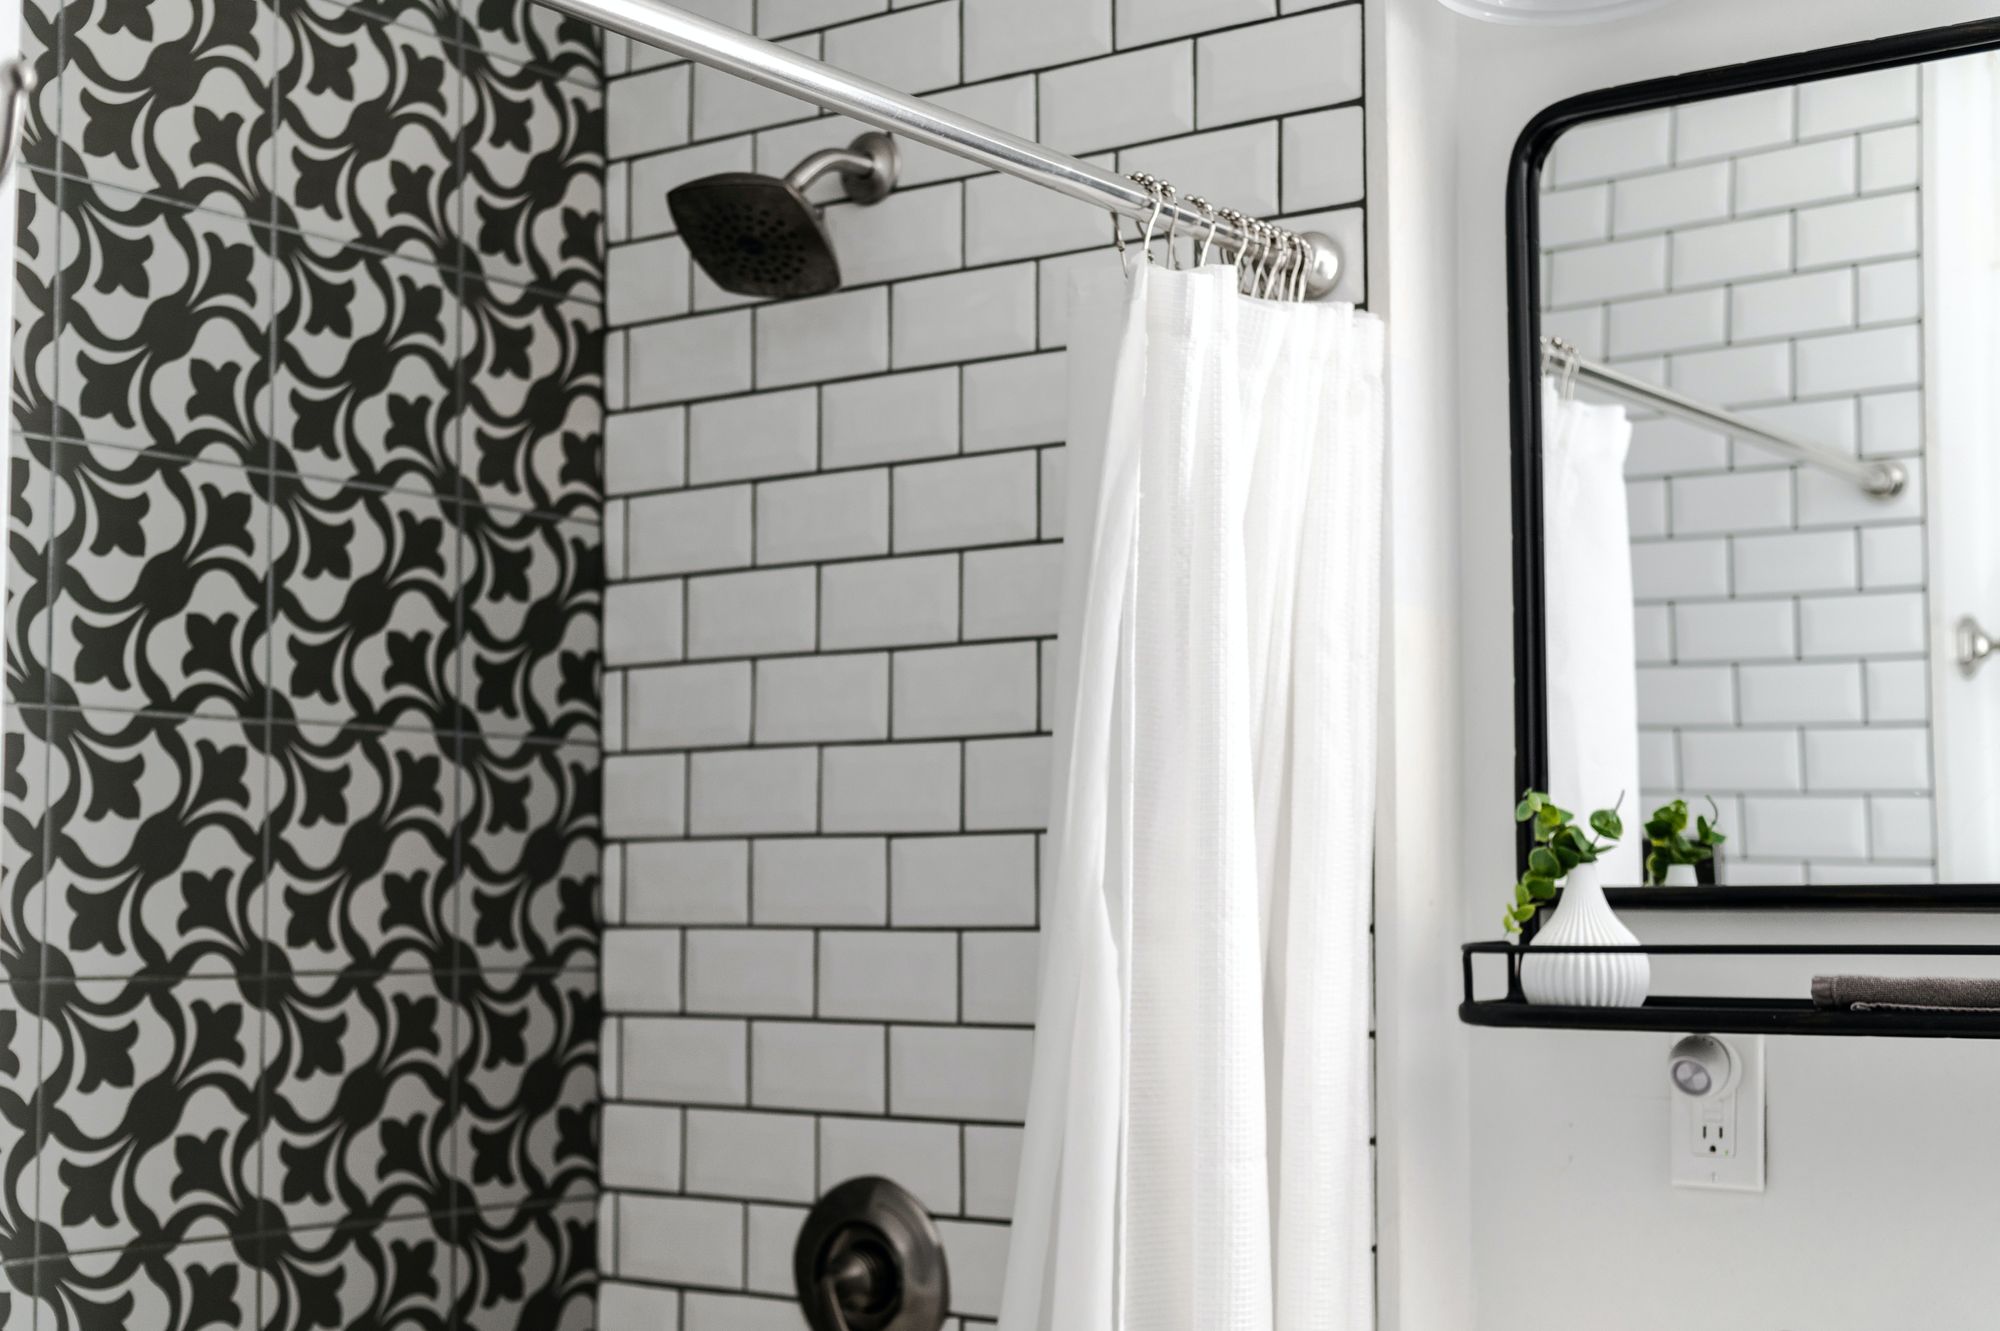 A shower curtain in a black-and-white bathroom.